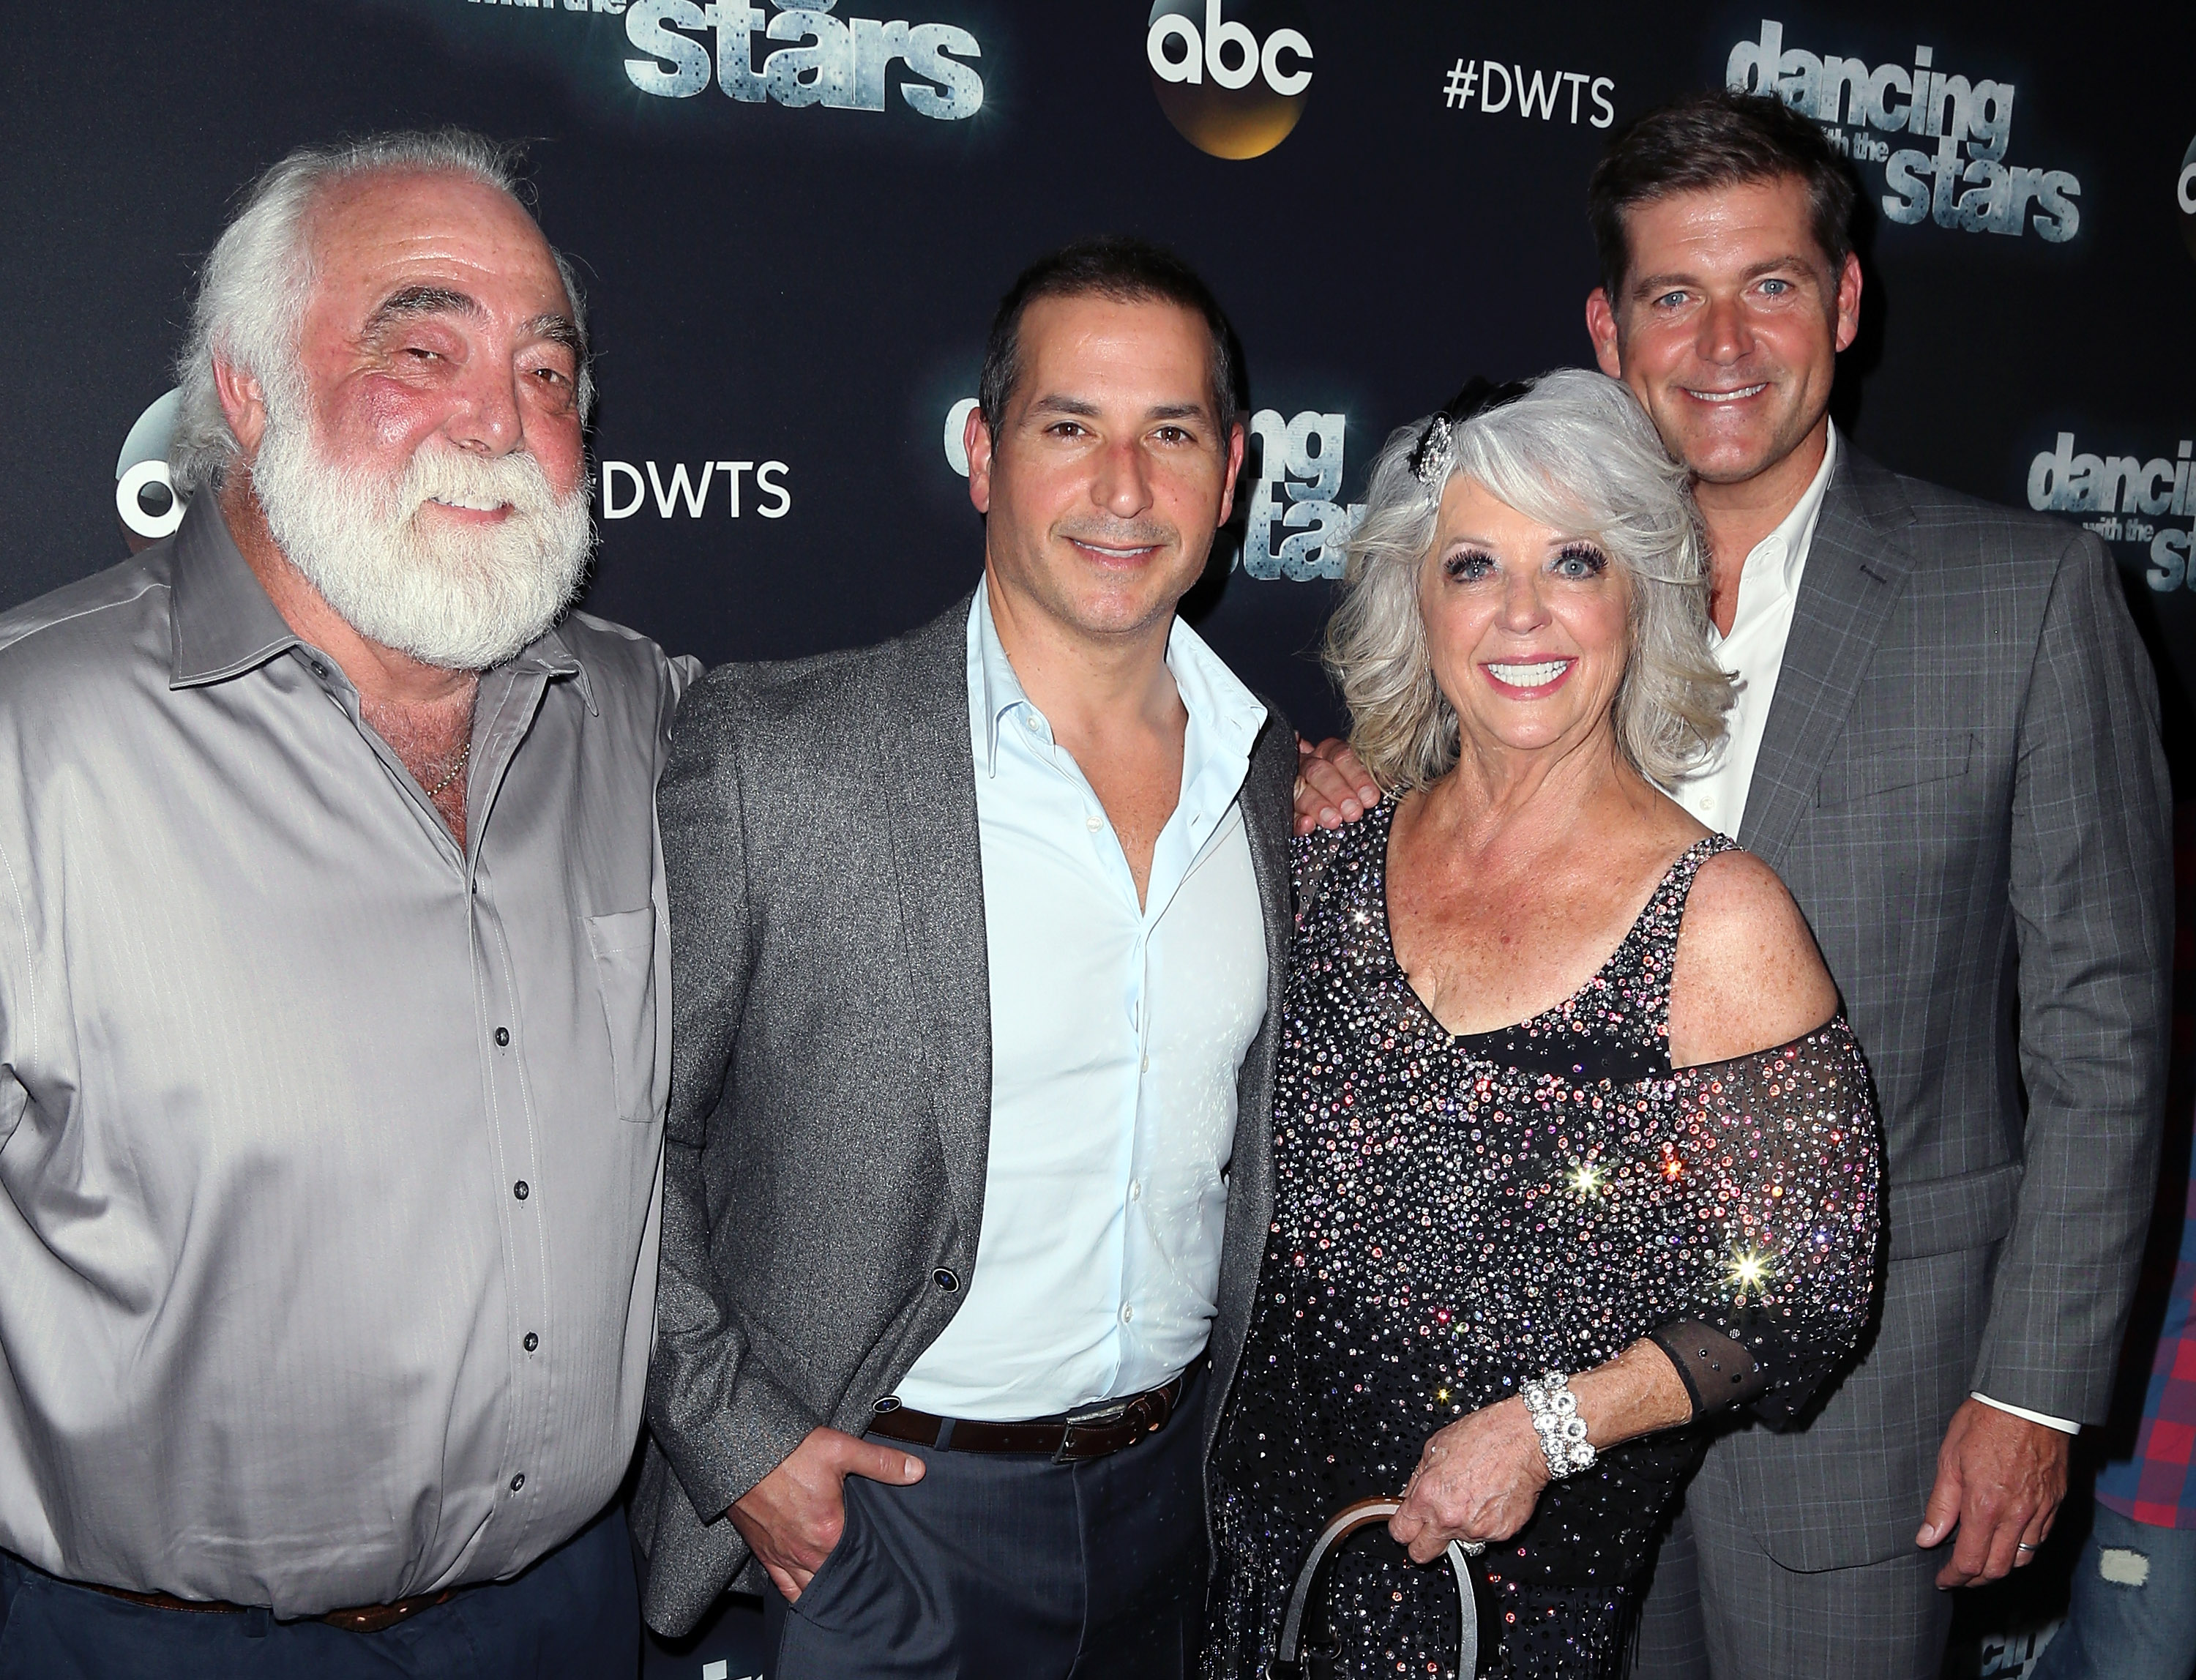 Michael Groover, Bobby, Paula, and Jamie Deen at season 21 of "Dancing with the Stars" at CBS Television City in Los Angeles, California, on October 5, 2015. | Source: Getty Images